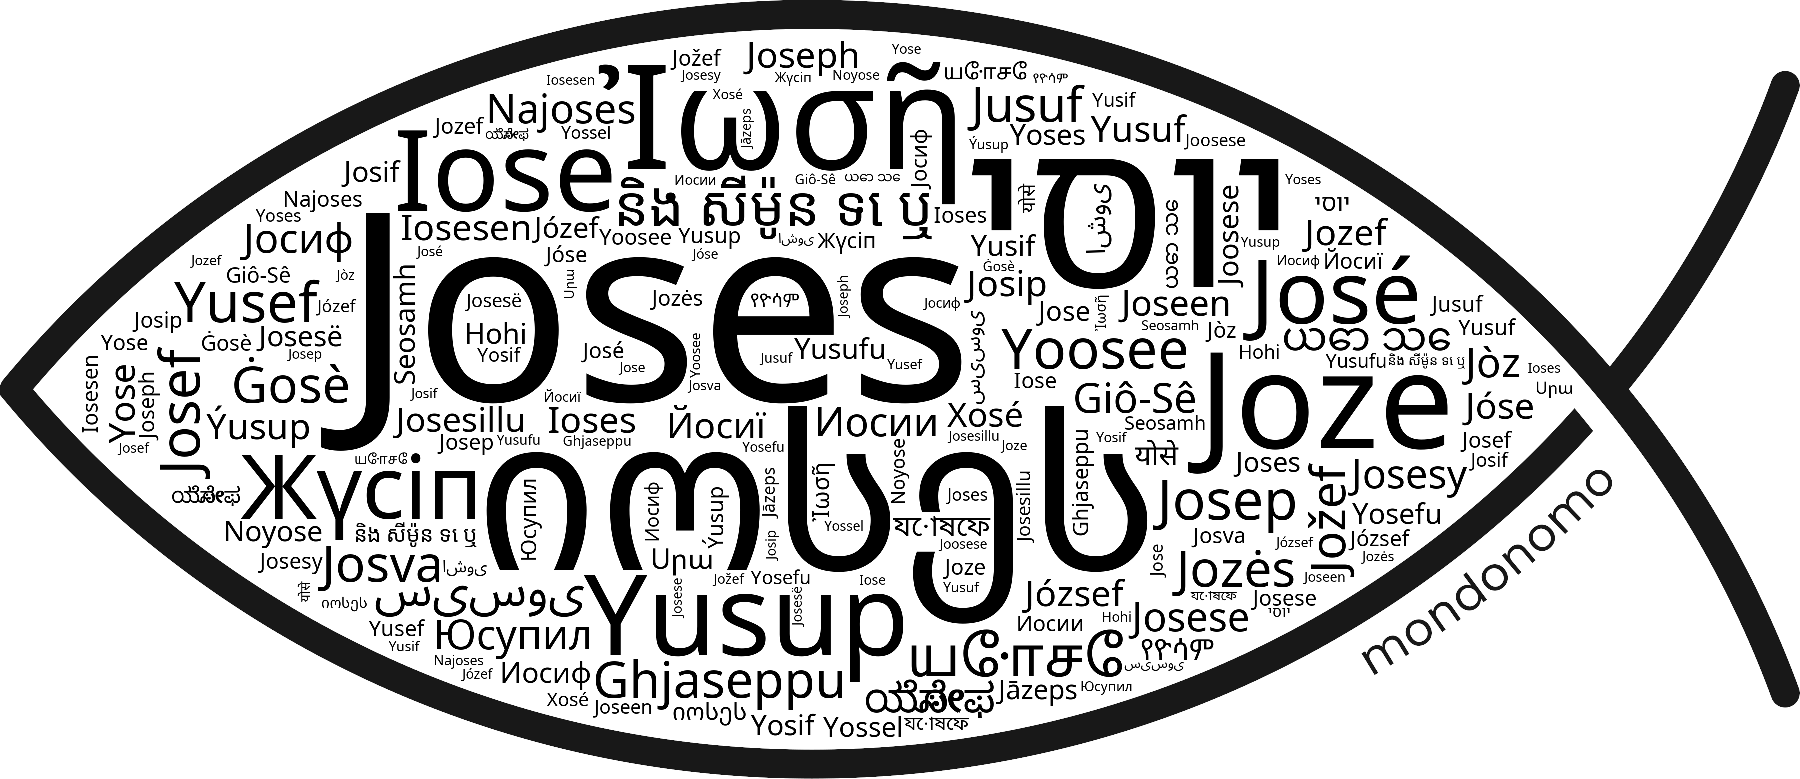 Name Joses in the world's Bibles